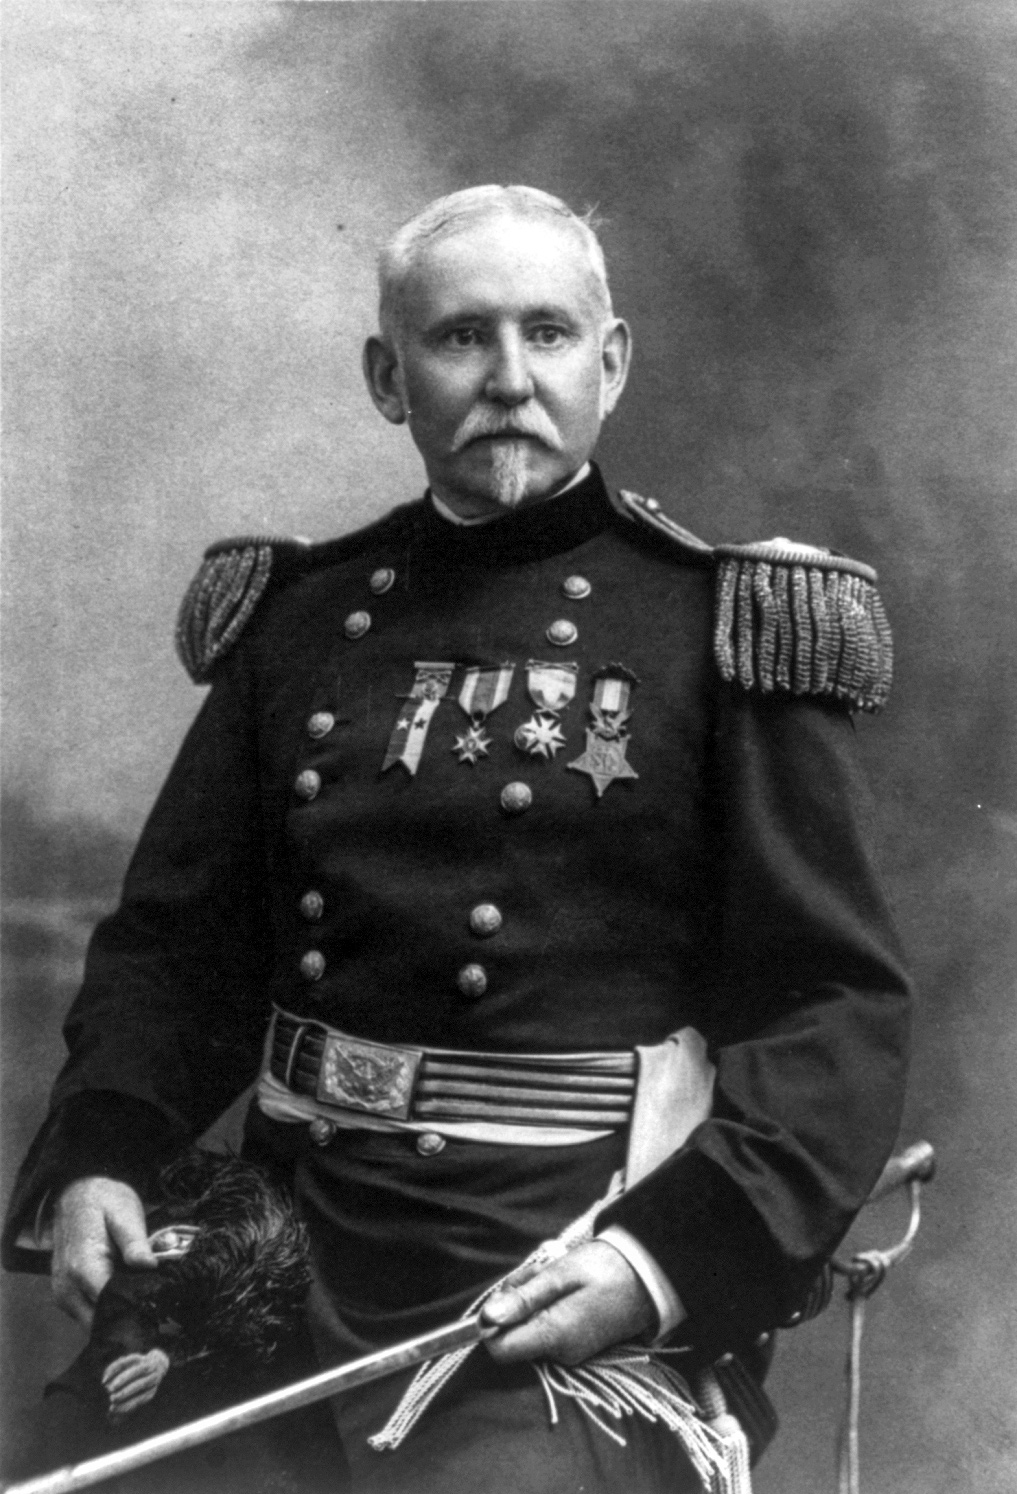 A man, George Gillespie, in full military dress and holding a sword, with four medals pinned to his chest.